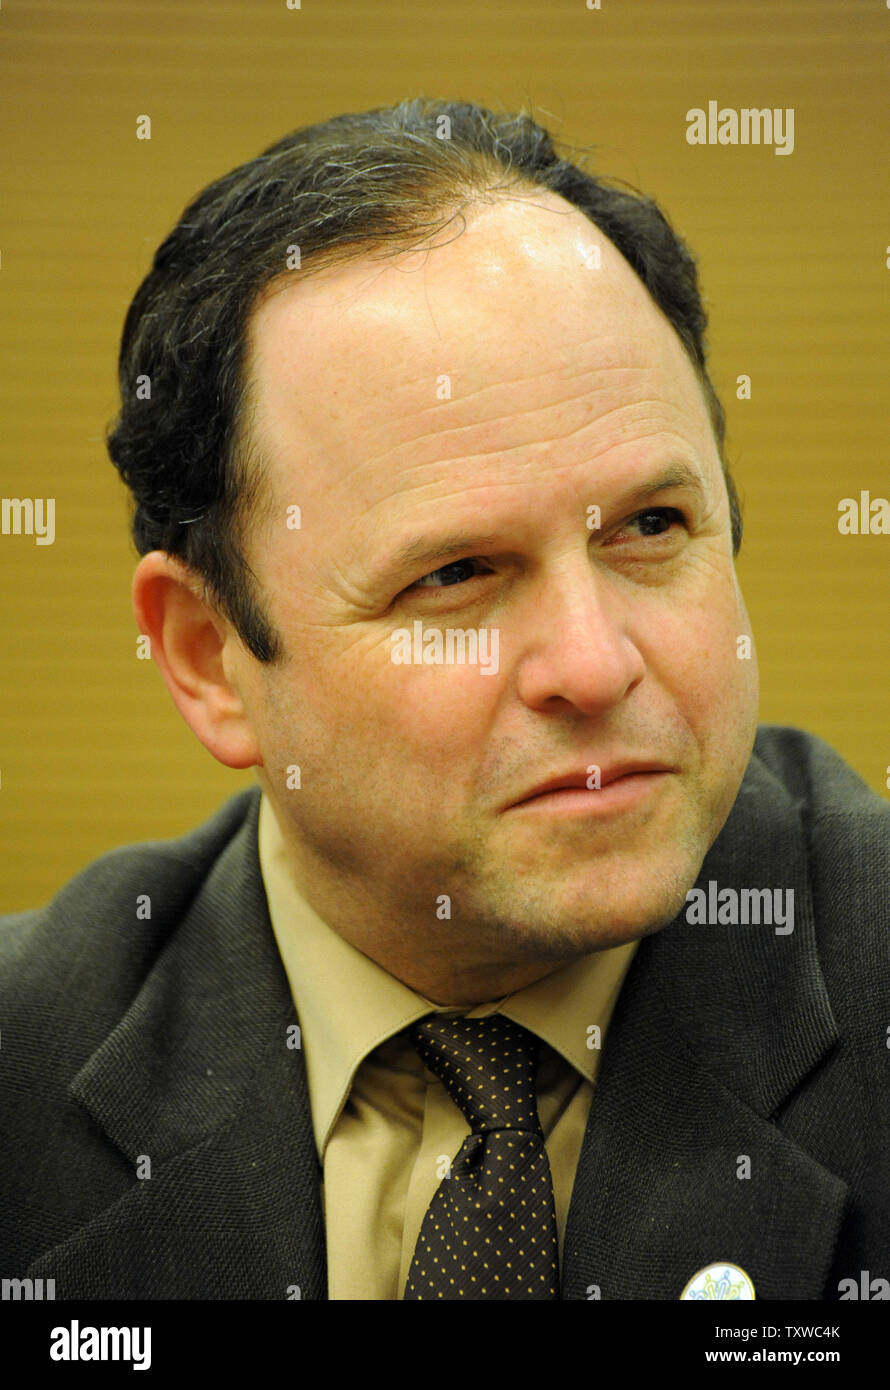 American actor Jason Alexander participates in a debate  in the Israeli Knesset, the Parliament, in Jerusalem, promoting a two-state solution to the Israeli and Palestinian conflict, October 24, 2011.  Alexander, most famous for his role as George Costanza in the hit sitcom Seinfield, is in Israel with the 'One Voice' campaign and will meet with Israeli and Palestinian politicians. UPI/Debbie Hill Stock Photo